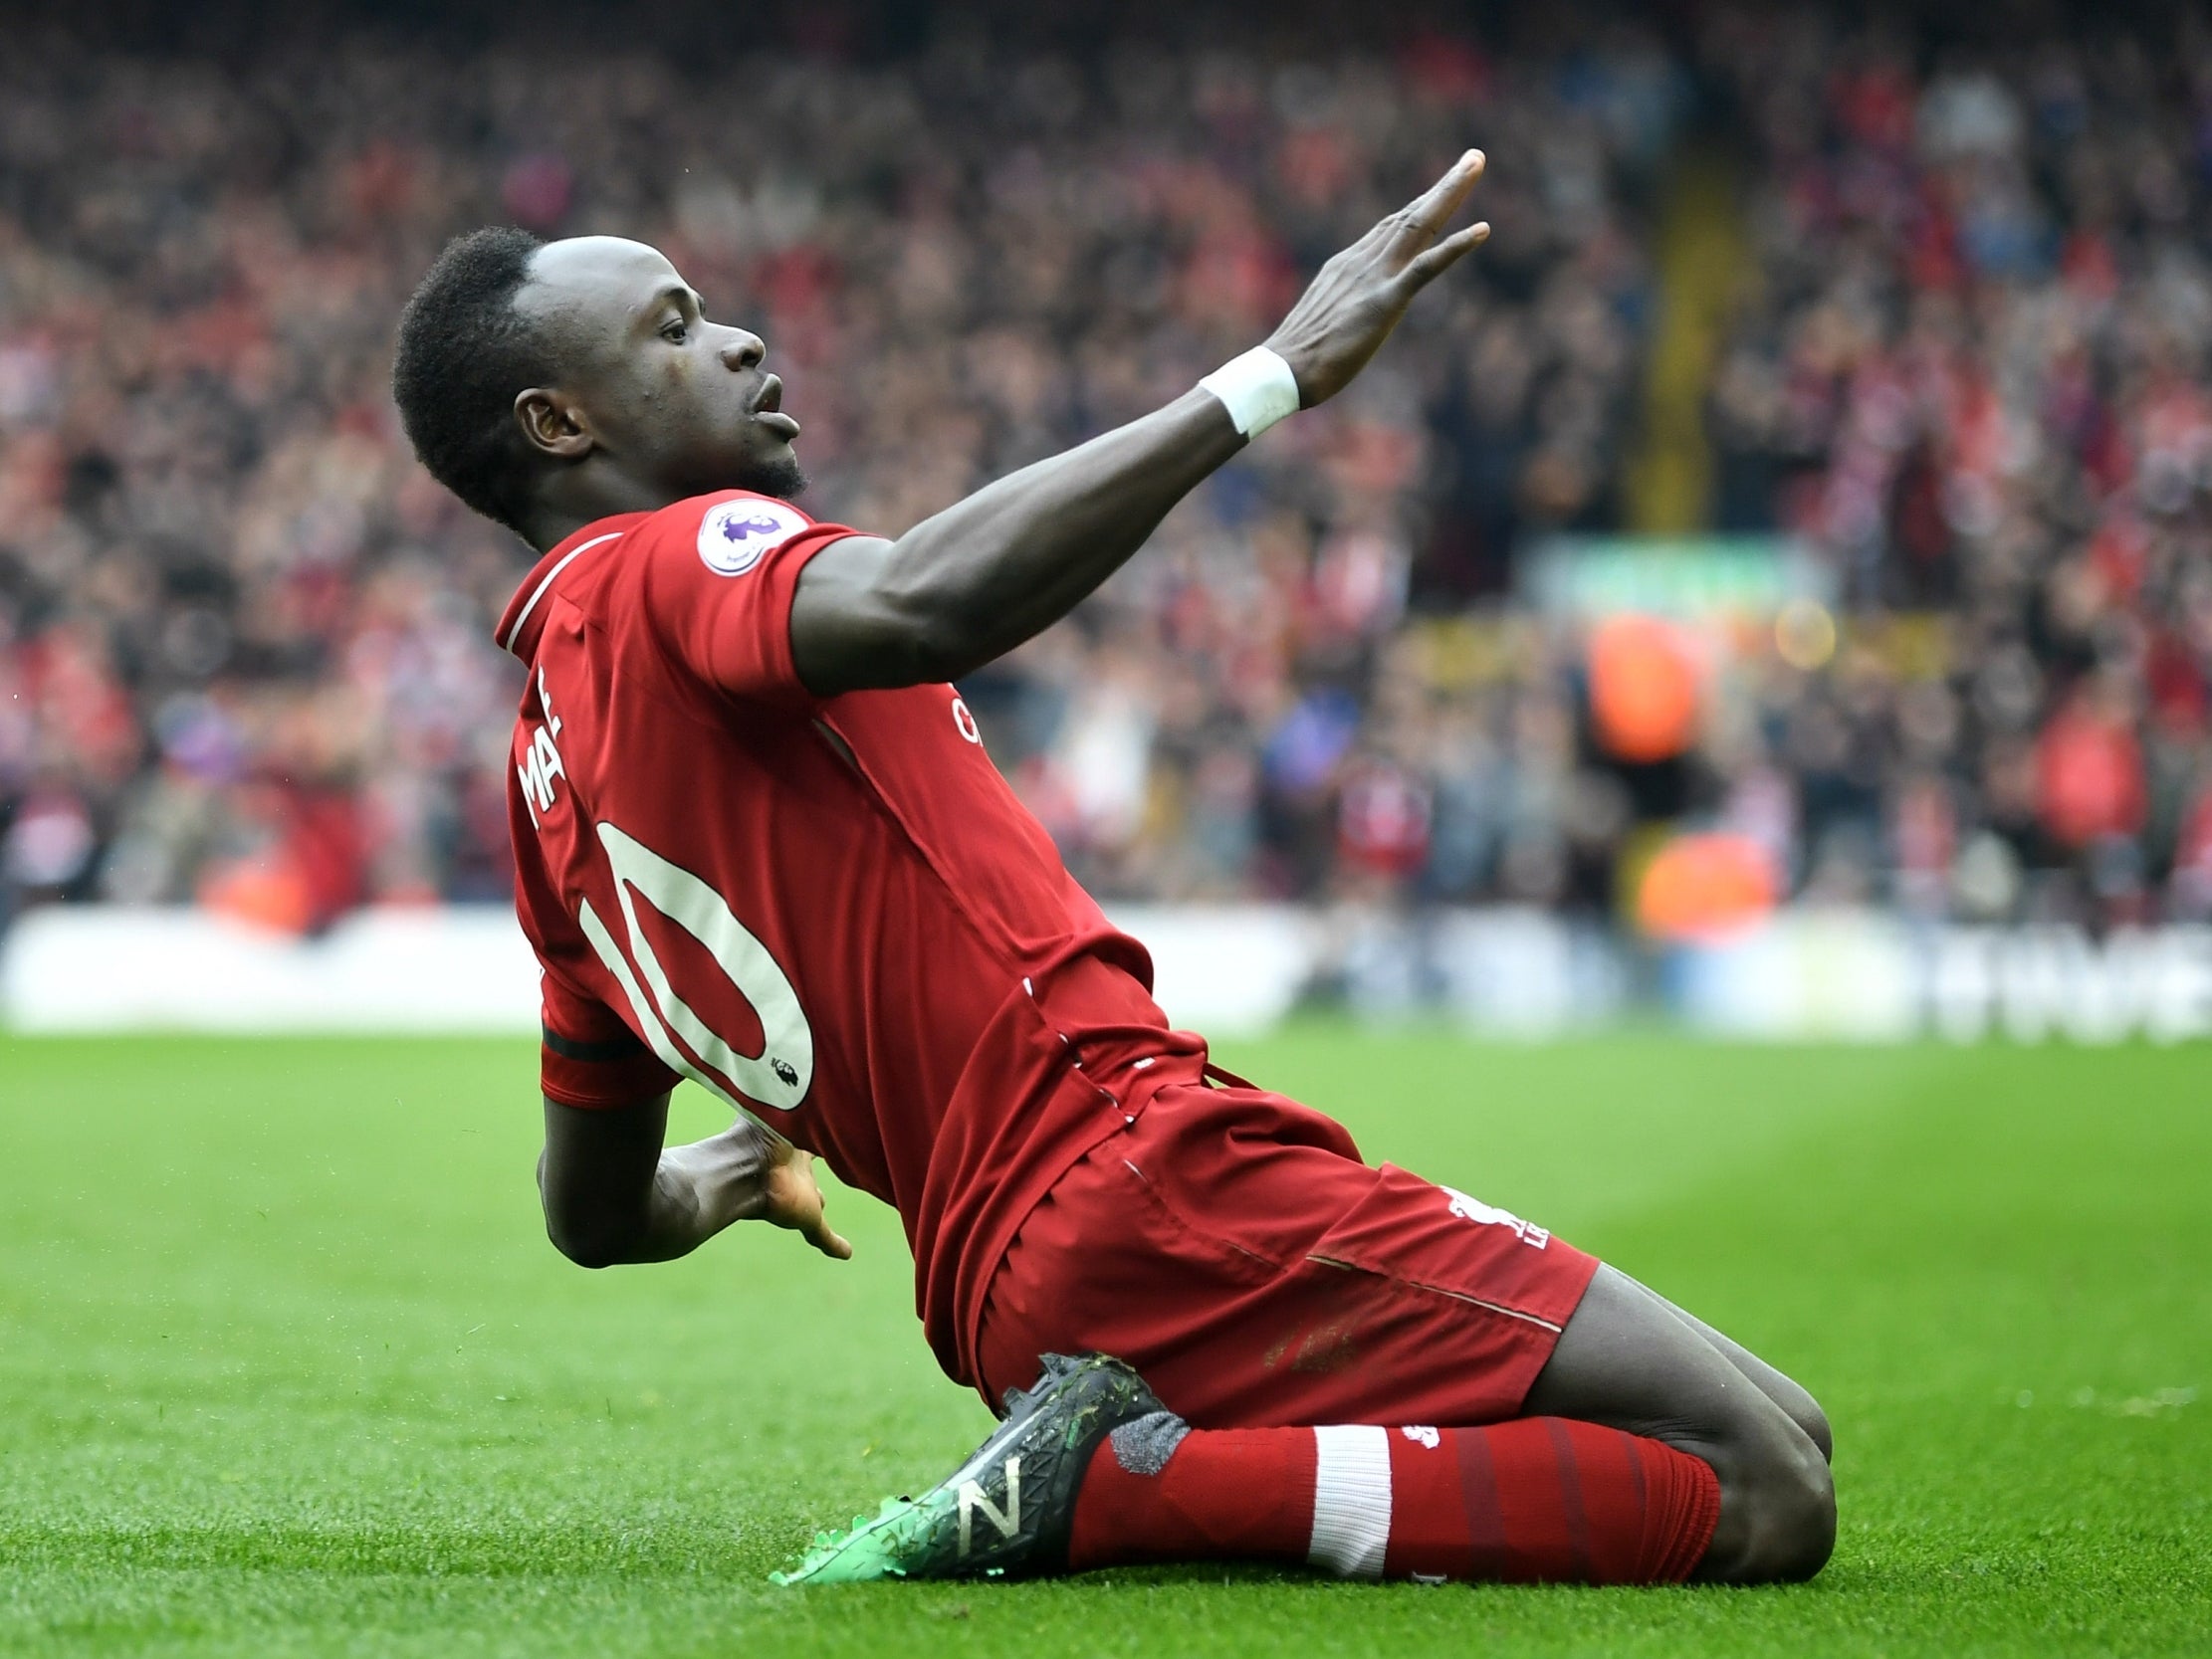 Liverpool vs Chelsea Five things we learned as Sadio Mane and Mohamed